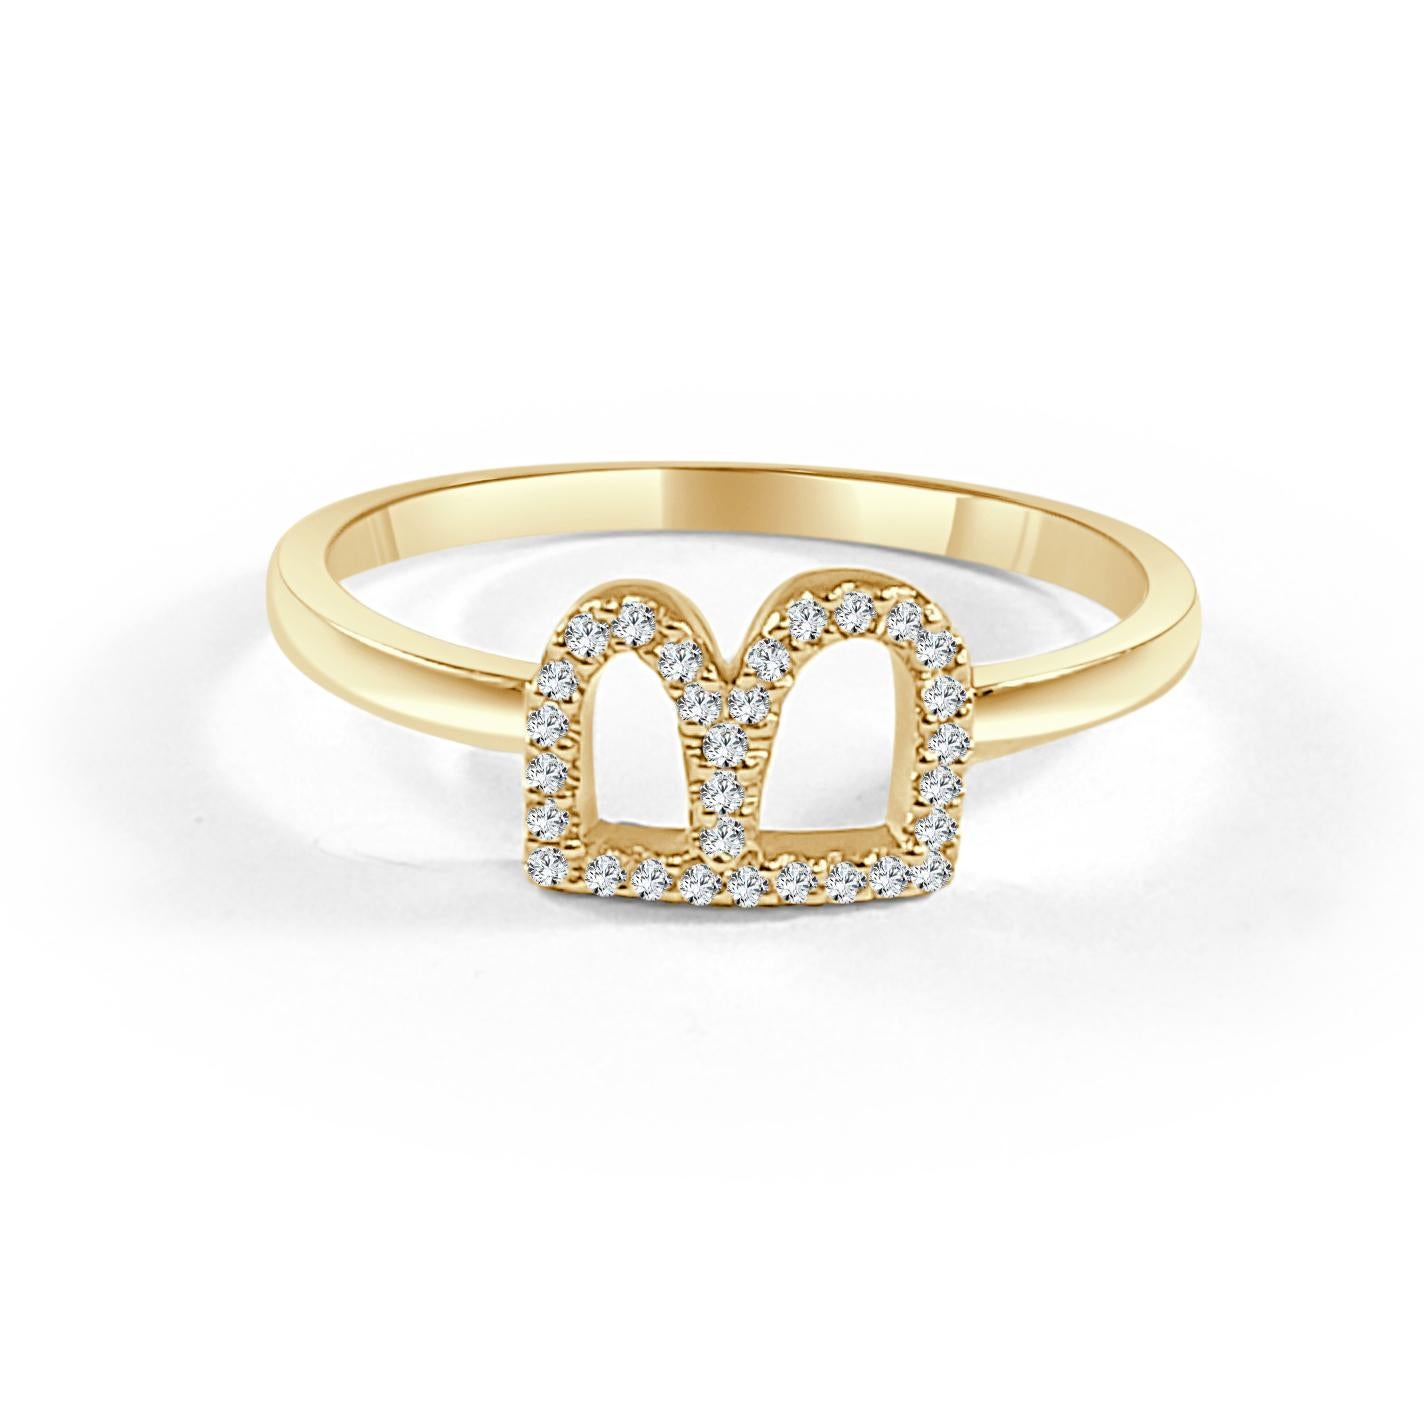 Alphabet Initial Ring: Beautiful gold ring perfectly size 7 in with round diamonds between 0.06 ct - 0.10, allowing you to show off your name, new last name or alma mater. This ring can also be sized up or down with your local jeweler. Custom sizing